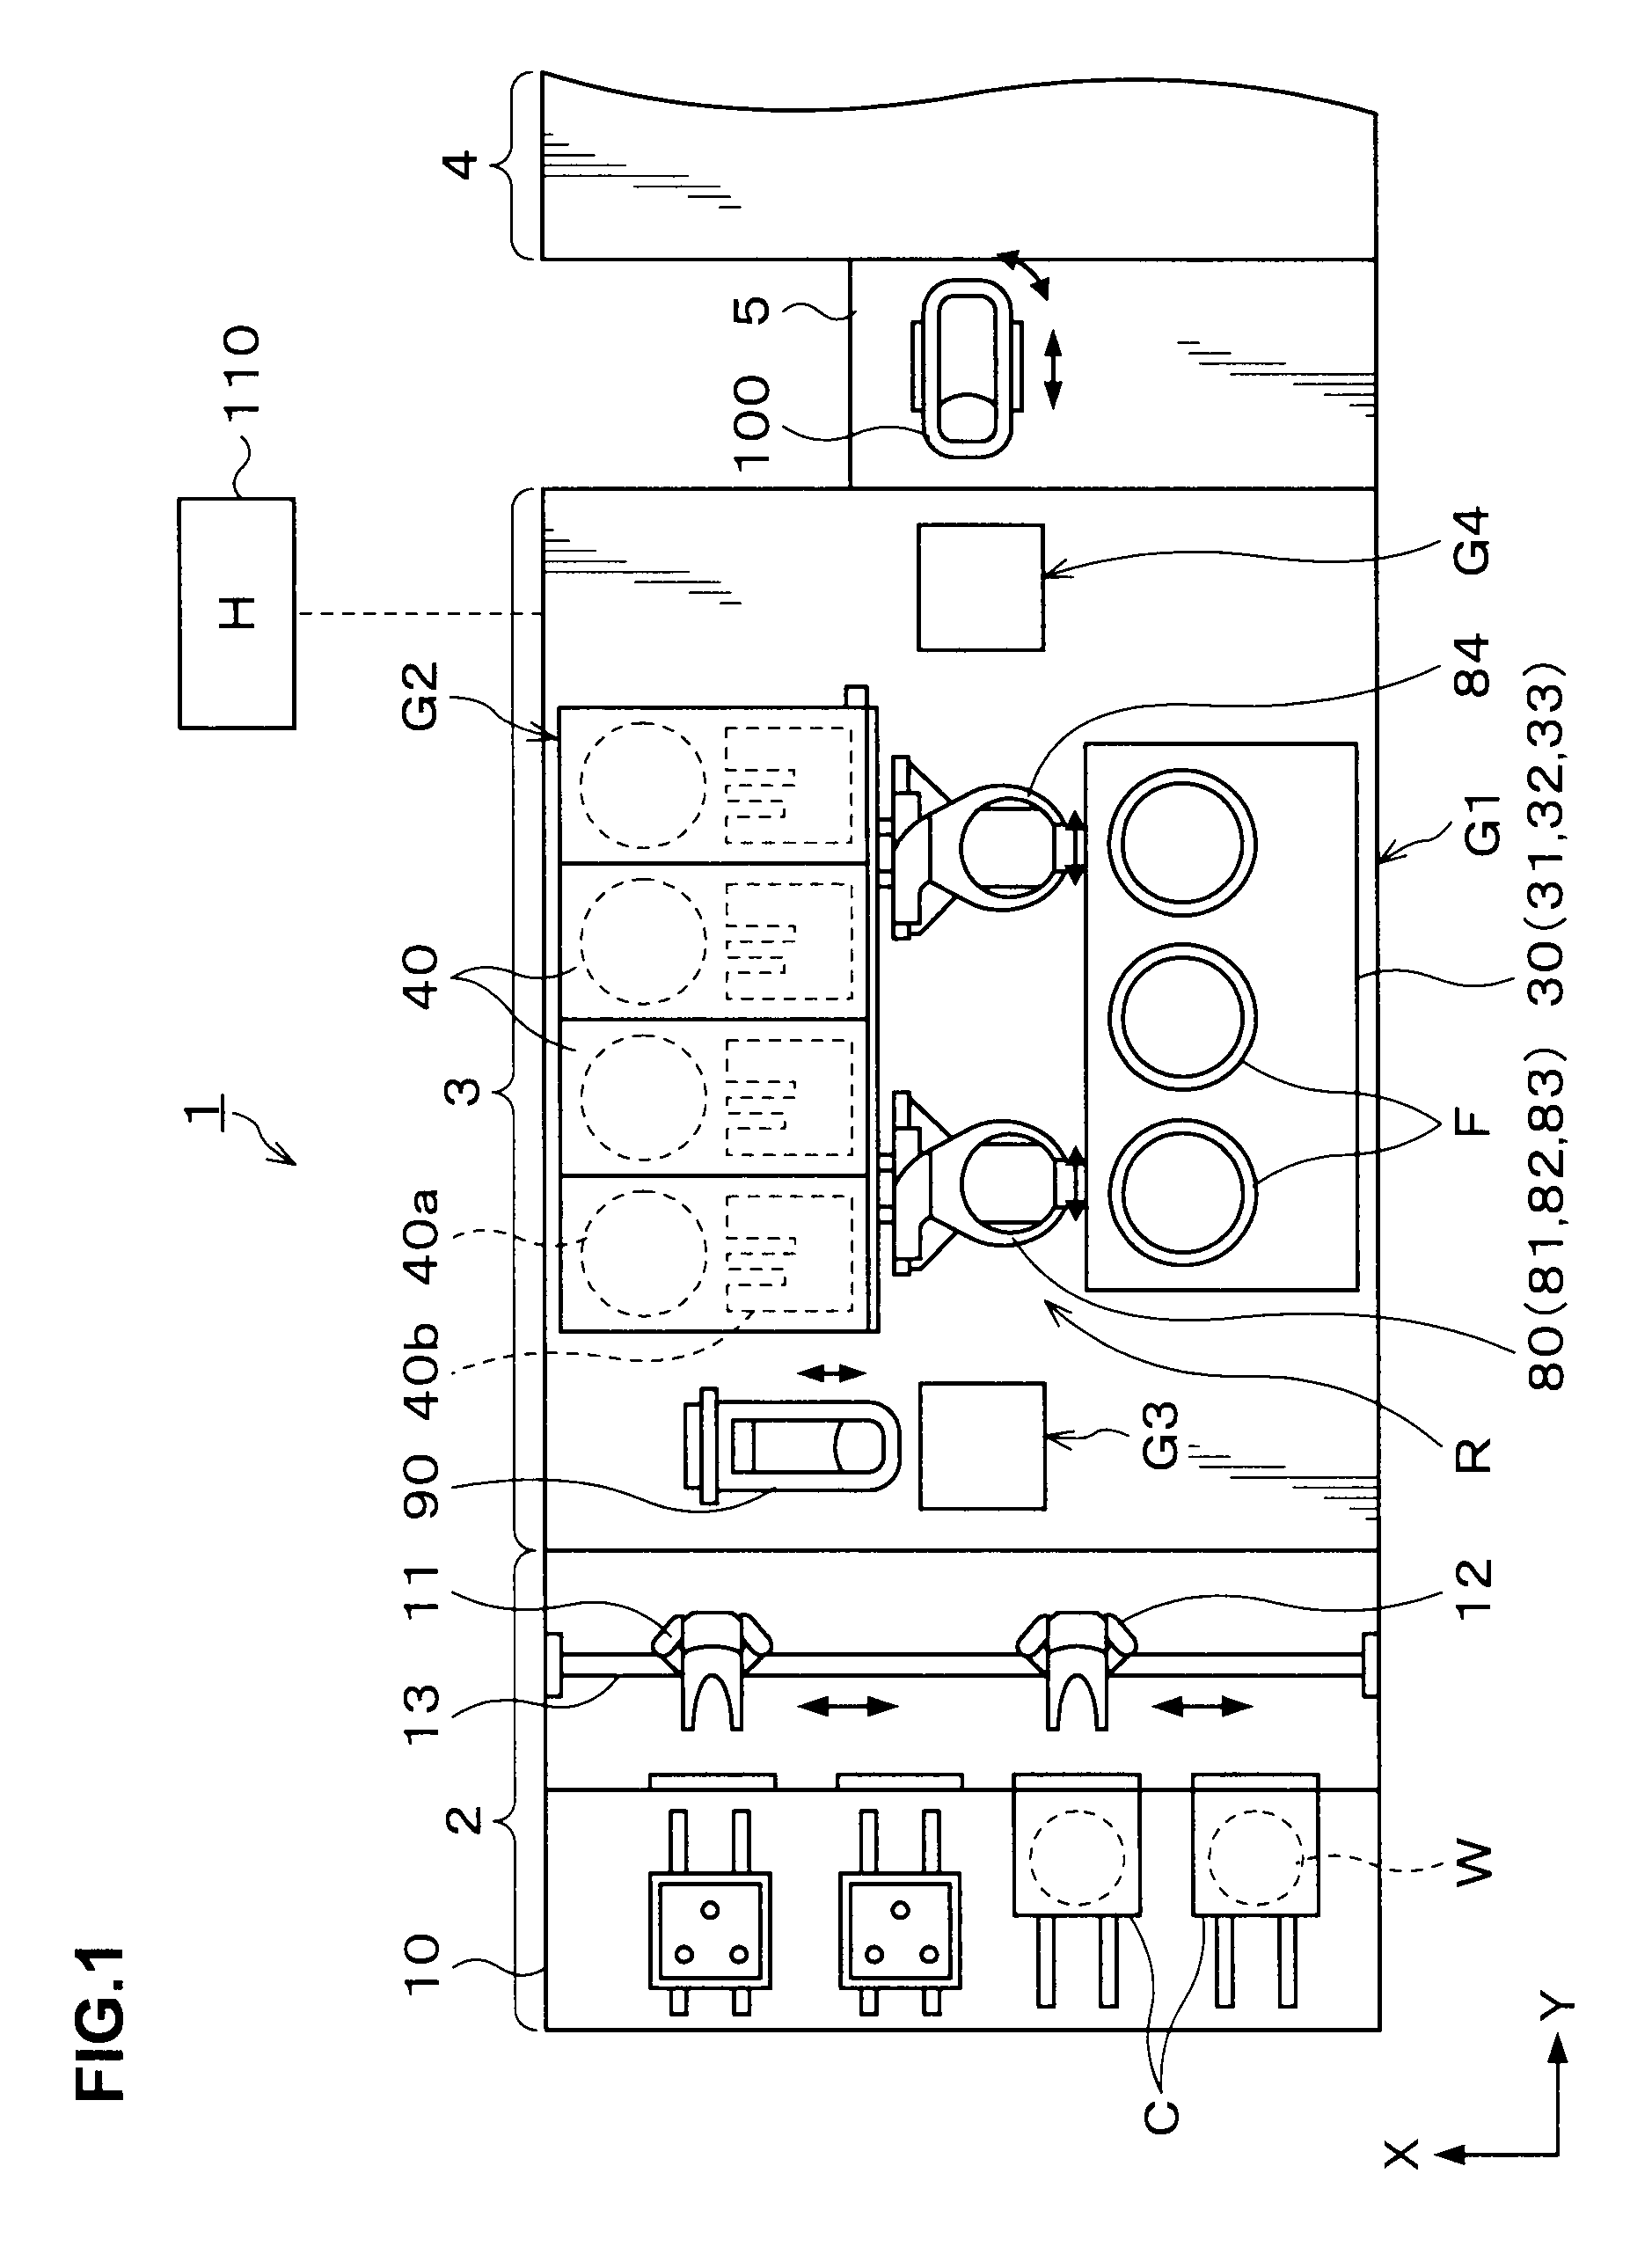 Substrate processing method, substrate processing system, and computer-readable storage medium